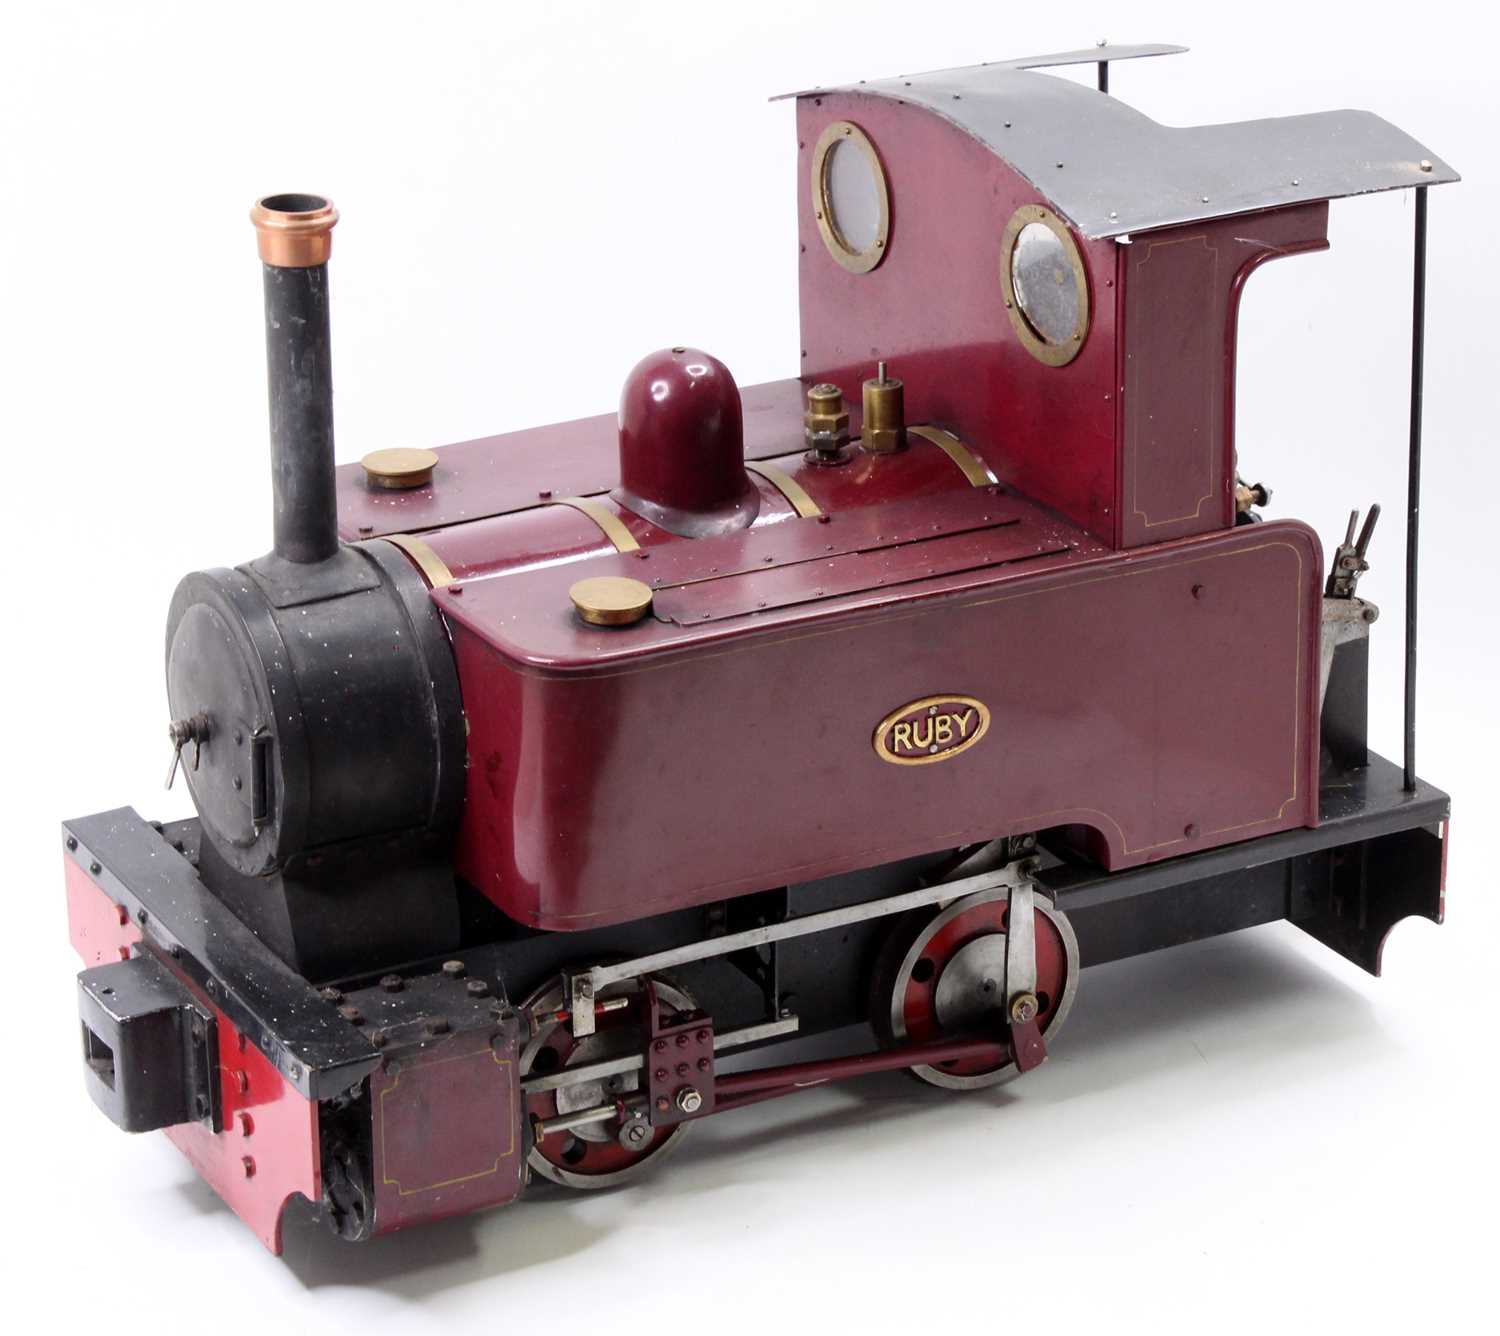 From Maxitrak Designs well-engineered 5" gauge live steam coal fired model of a 0-4-0 Contractors